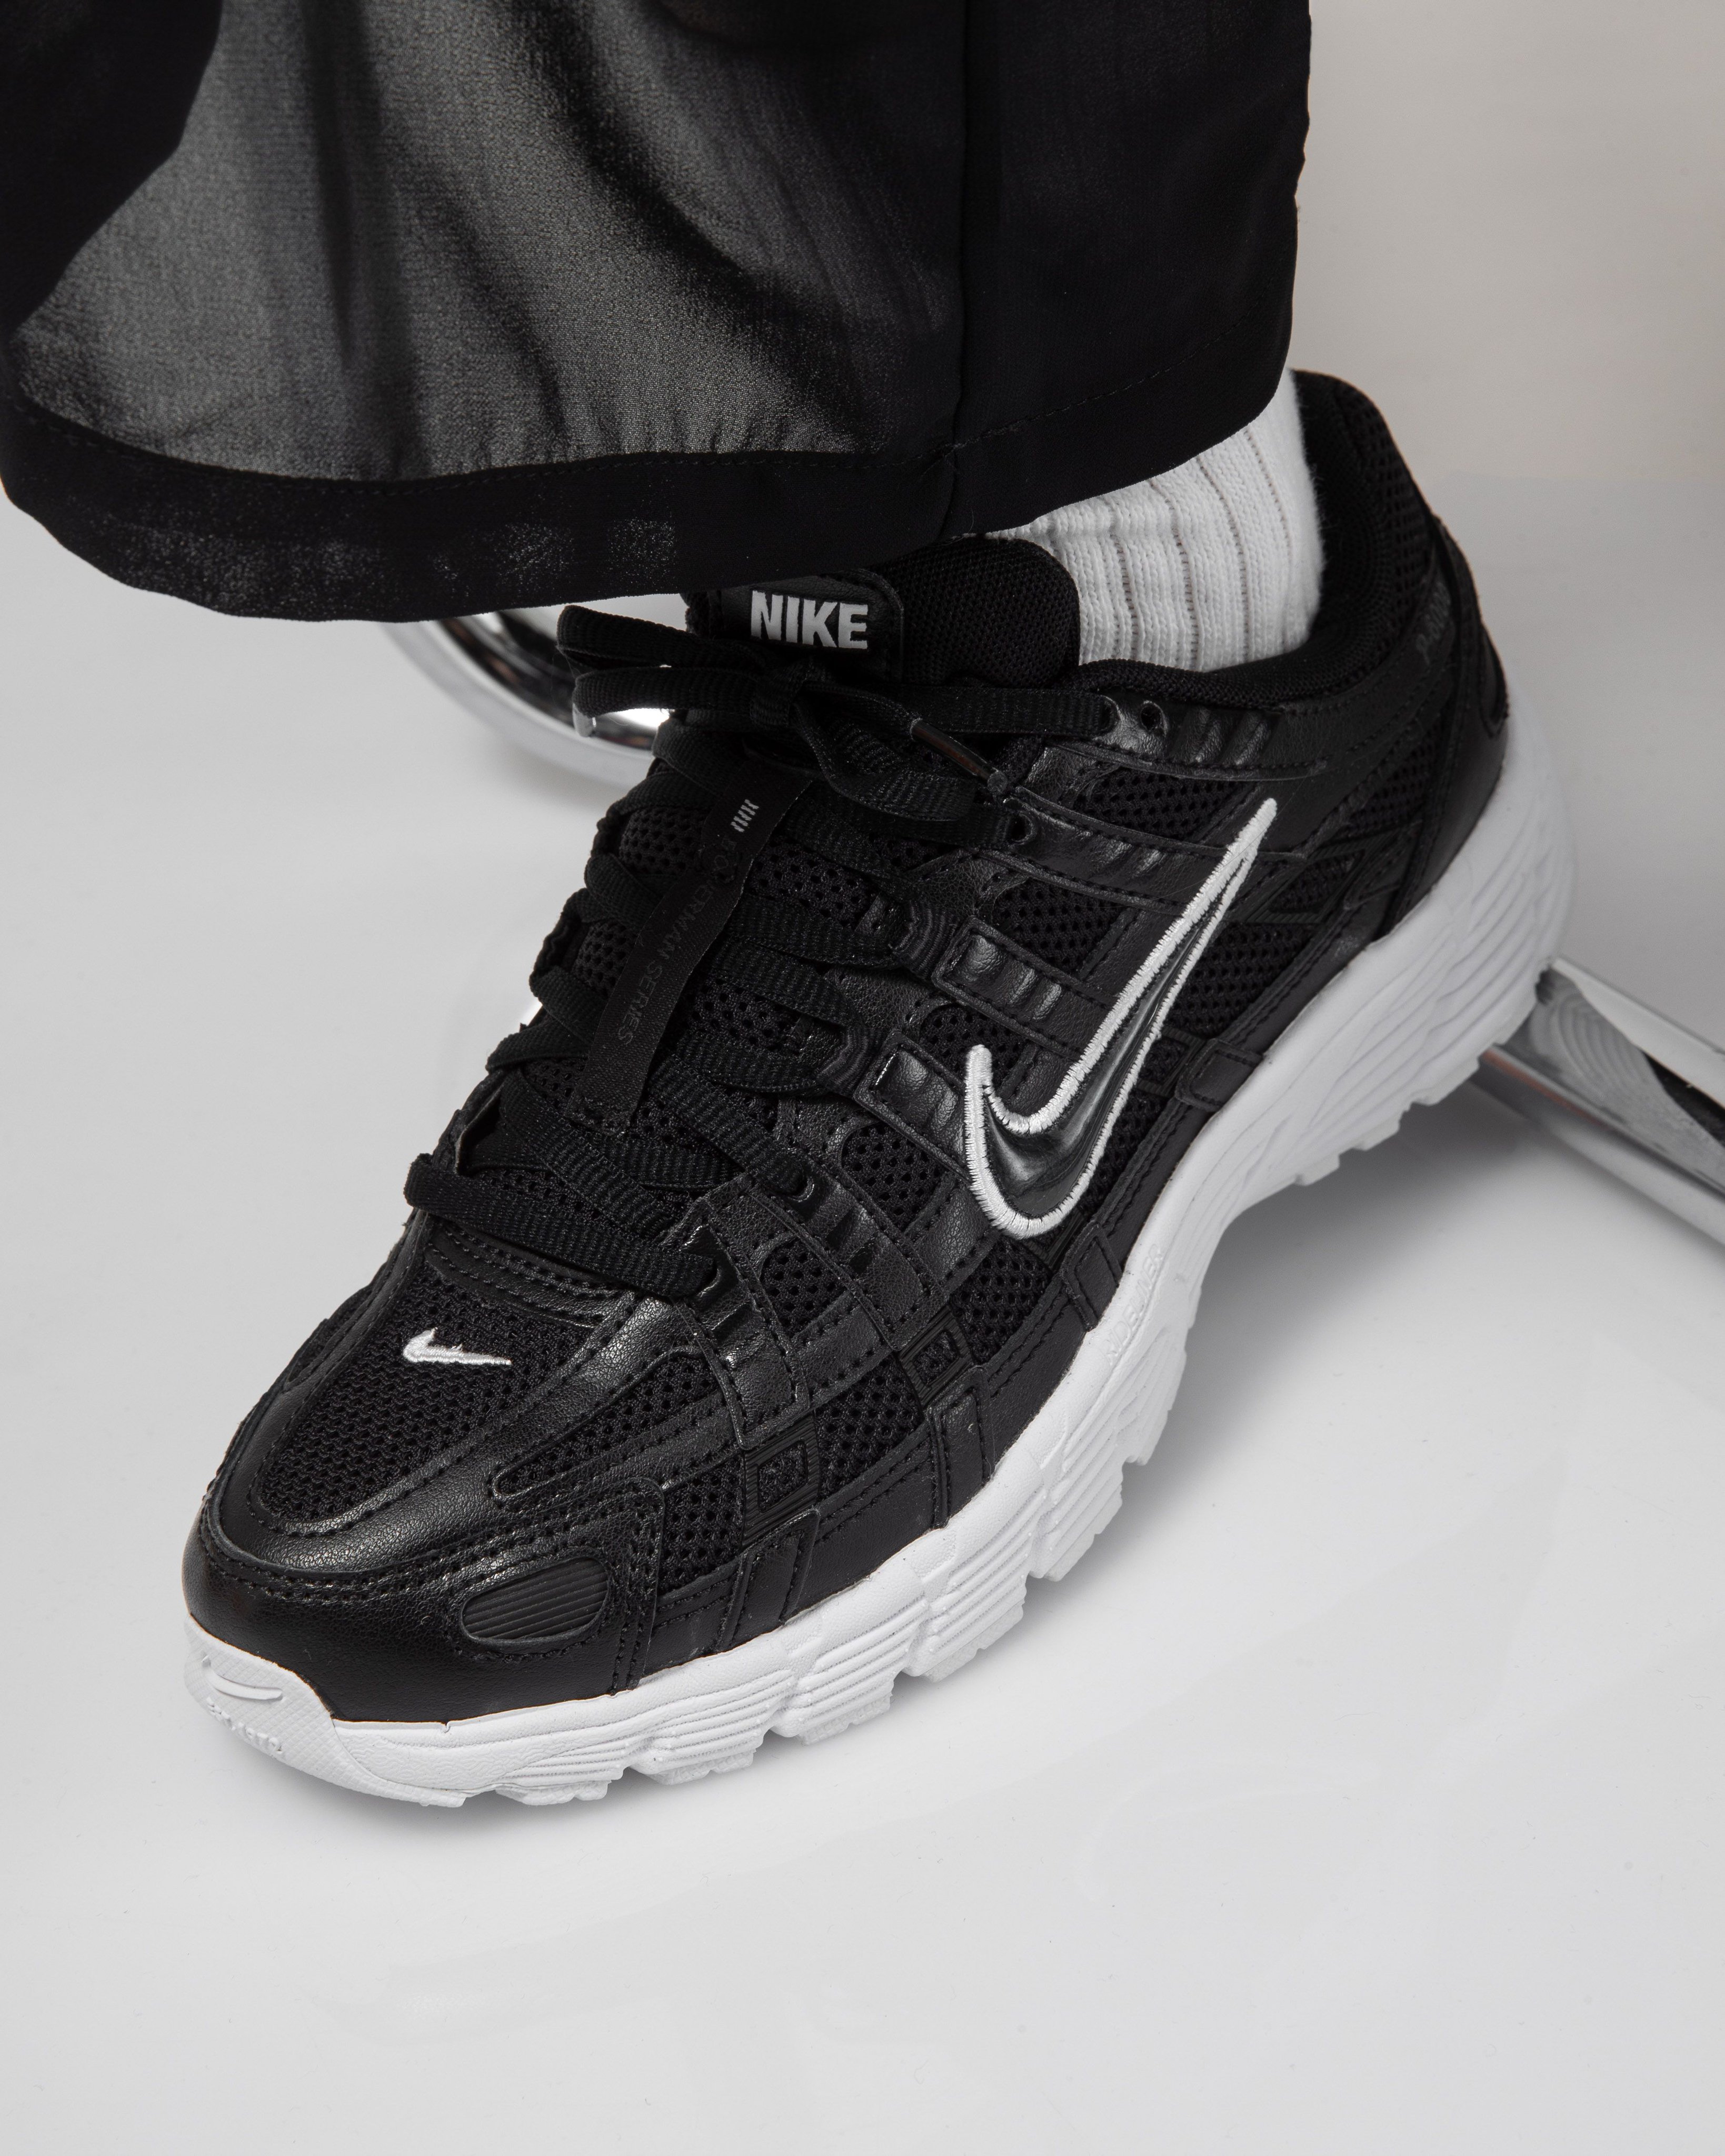 Titolo on "step out in the Nike Wmns P-6000 "Black/White" 👣 Now available online ➡️ https://t.co/LqivIVL5pw US 5 (35.5) - US 9.5 (41)⁠⠀ code 🔎 BV1021-004 #nike #p6000 #pants #tearaway #